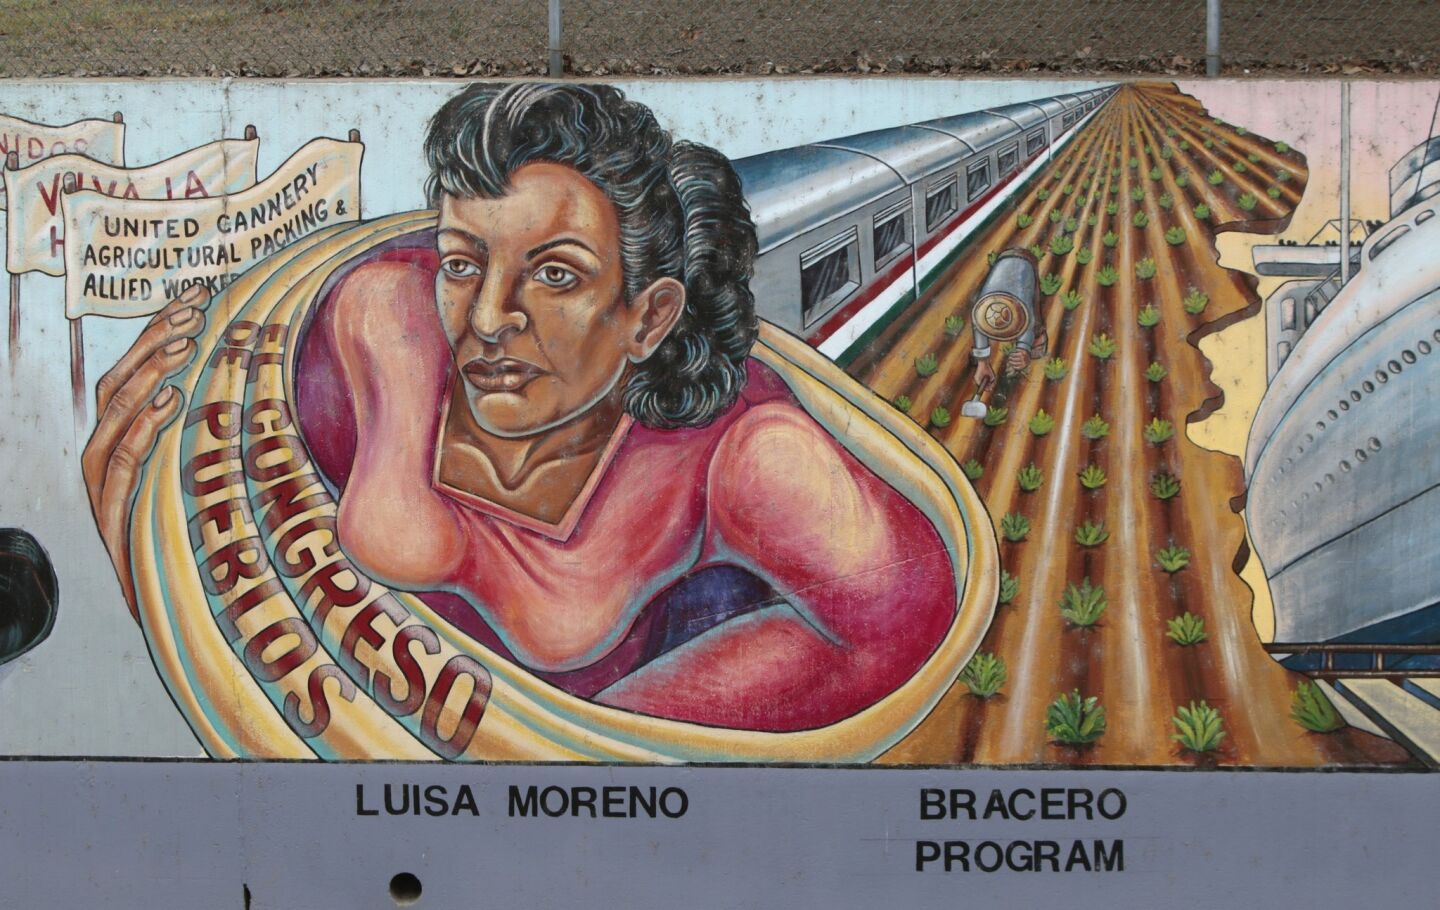 "The Great Wall of Los Angeles" had a substantial restoration in 2011. Here, a detail of the "bracero" migrant worker portion of the mural.